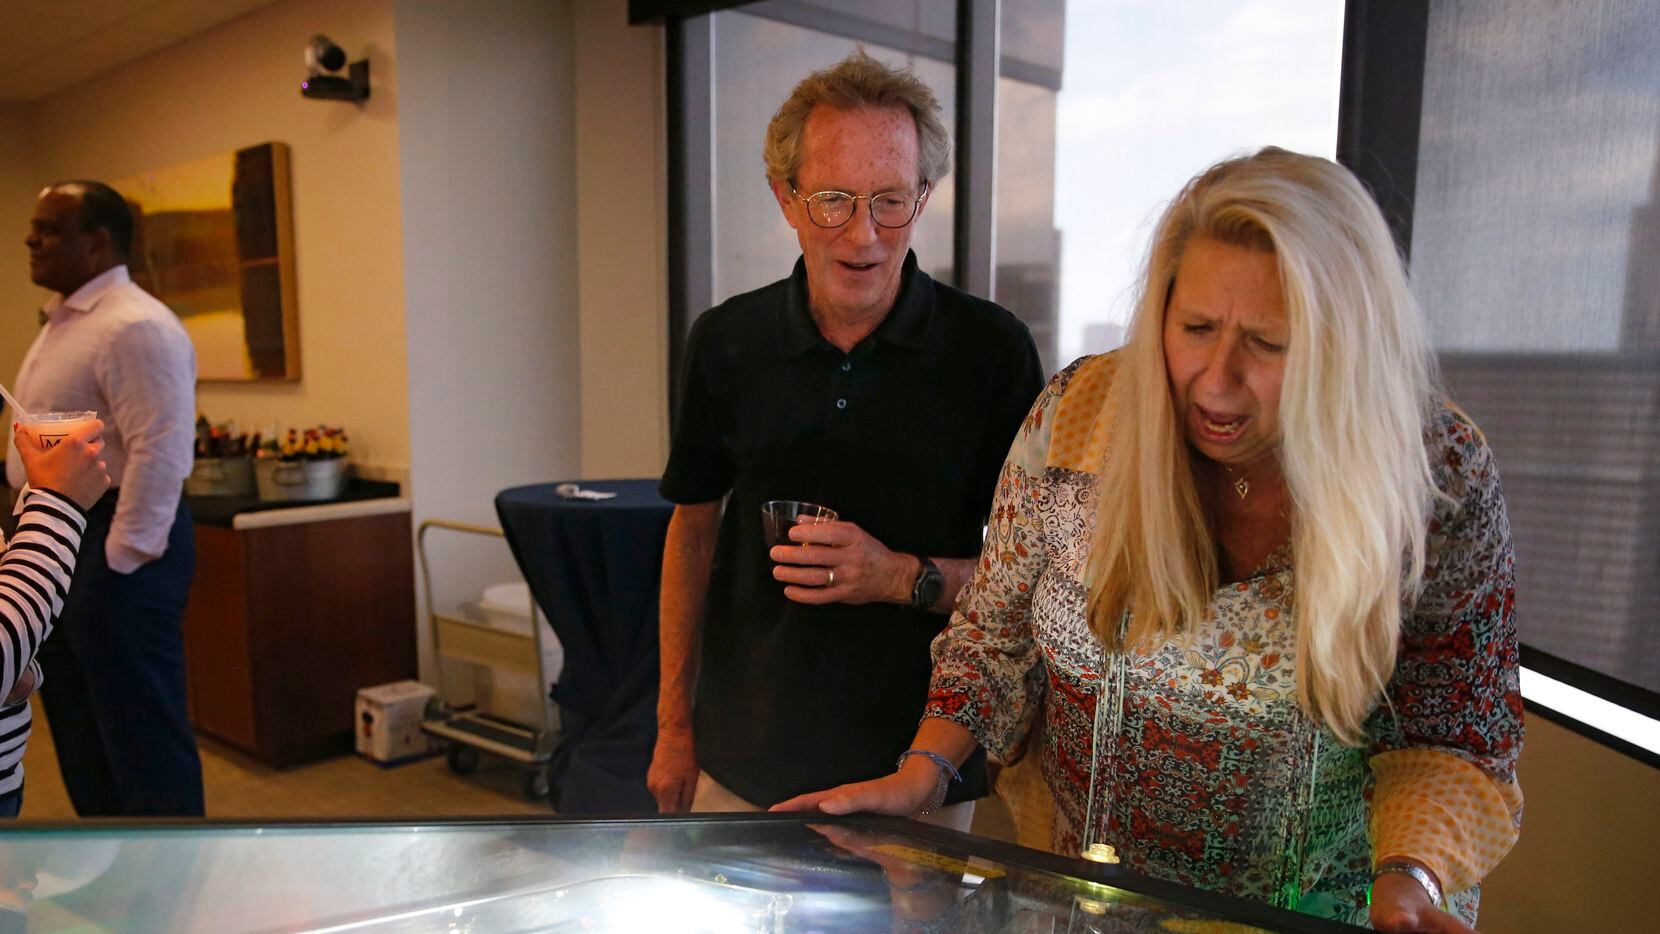 Sharon Blackstock plays a game of pinball while Rick Addison watches her lose the ball...